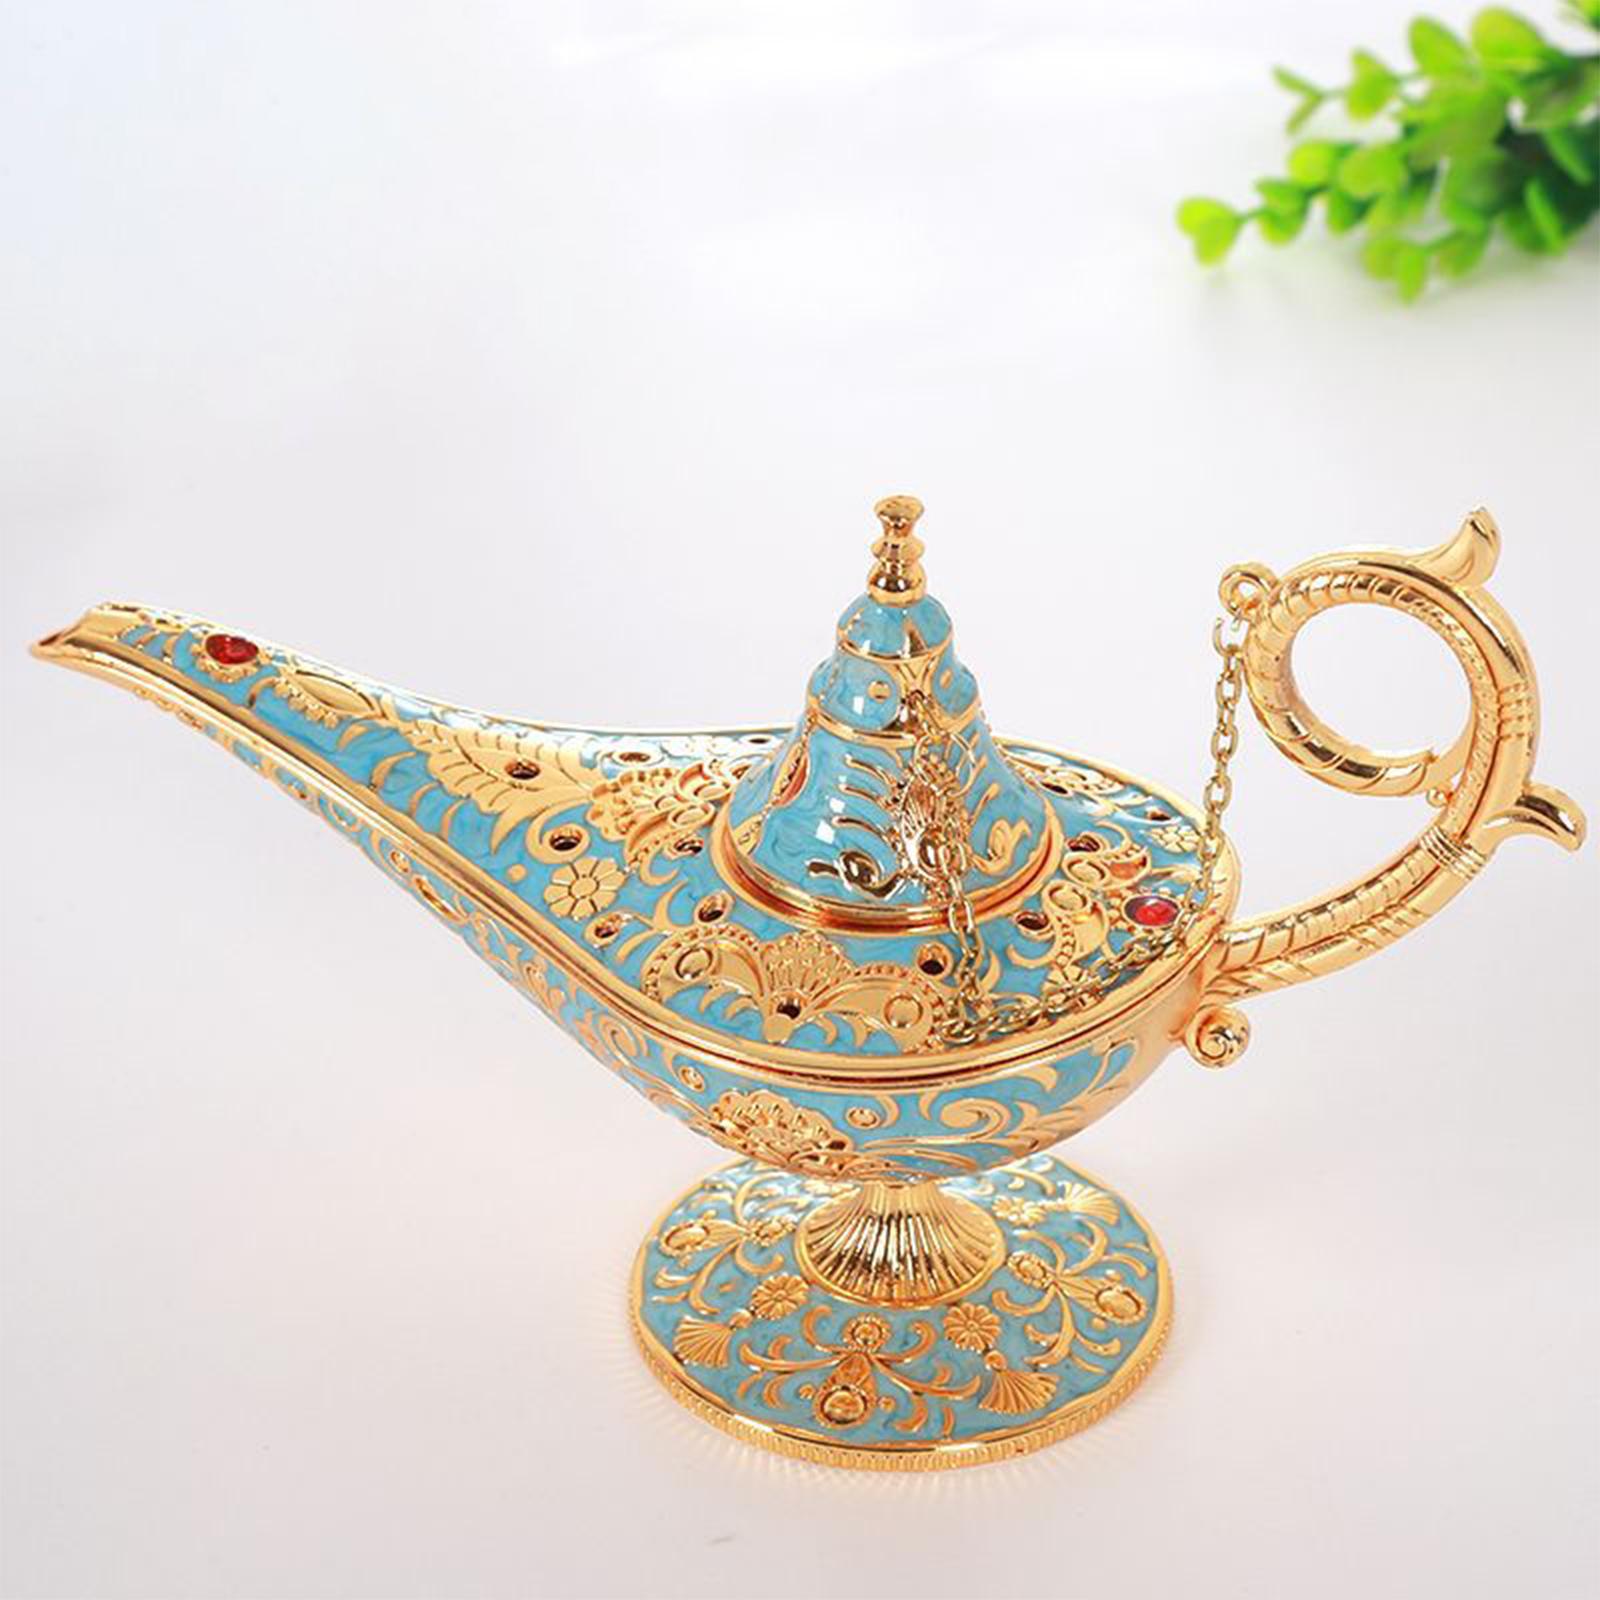 Wishing Light Lamp Decoration Carved for Themed Parties Festival Living Room Sky Blue